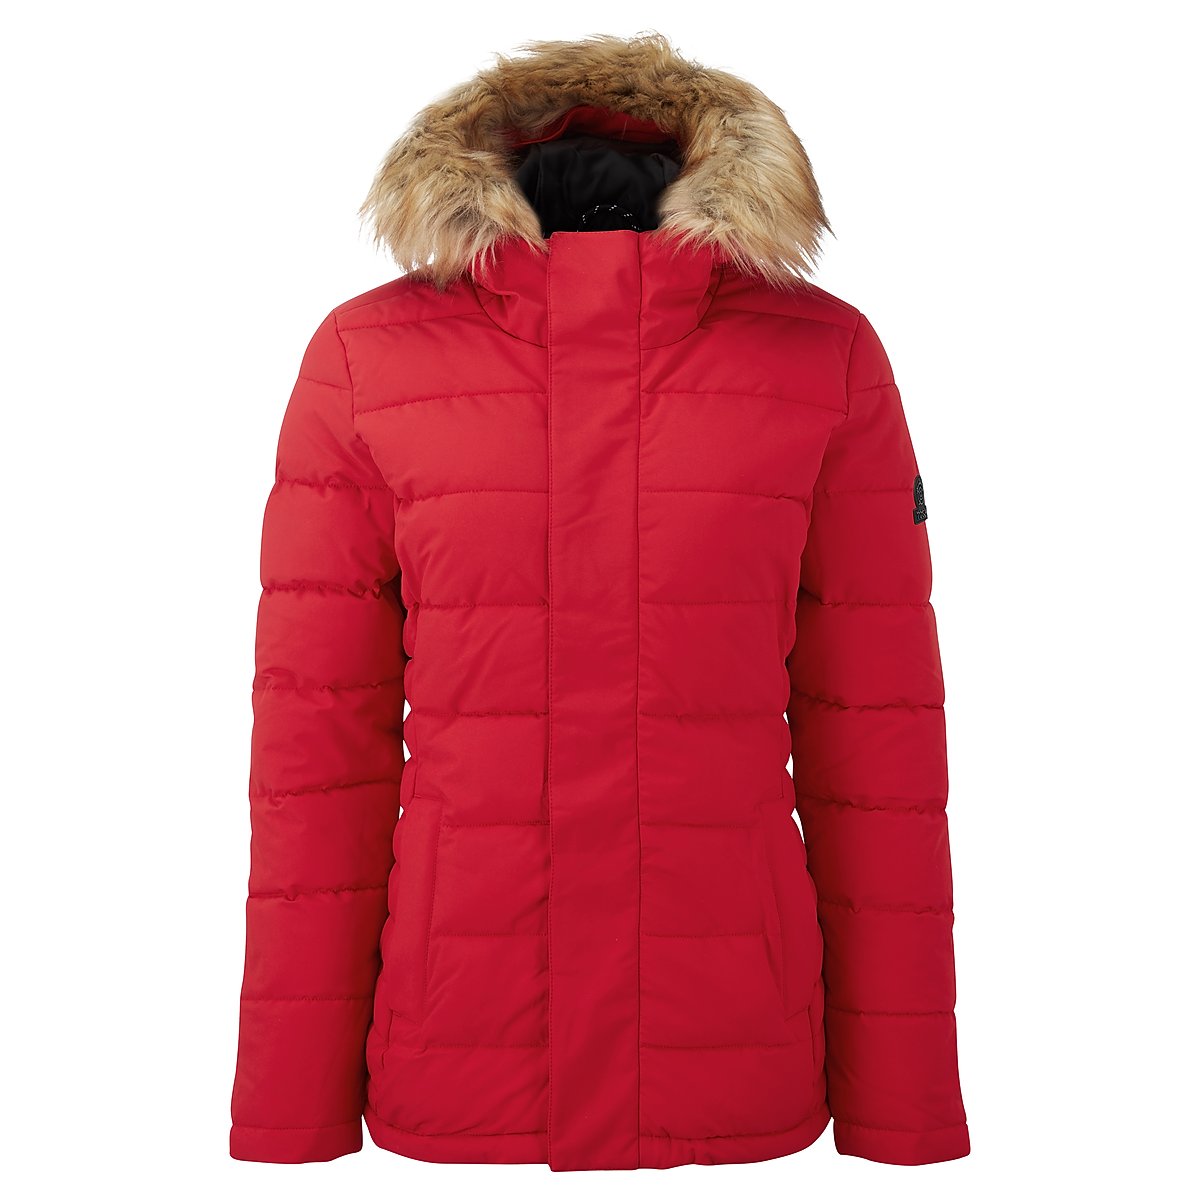 Helwith Women's Insulated Jacket